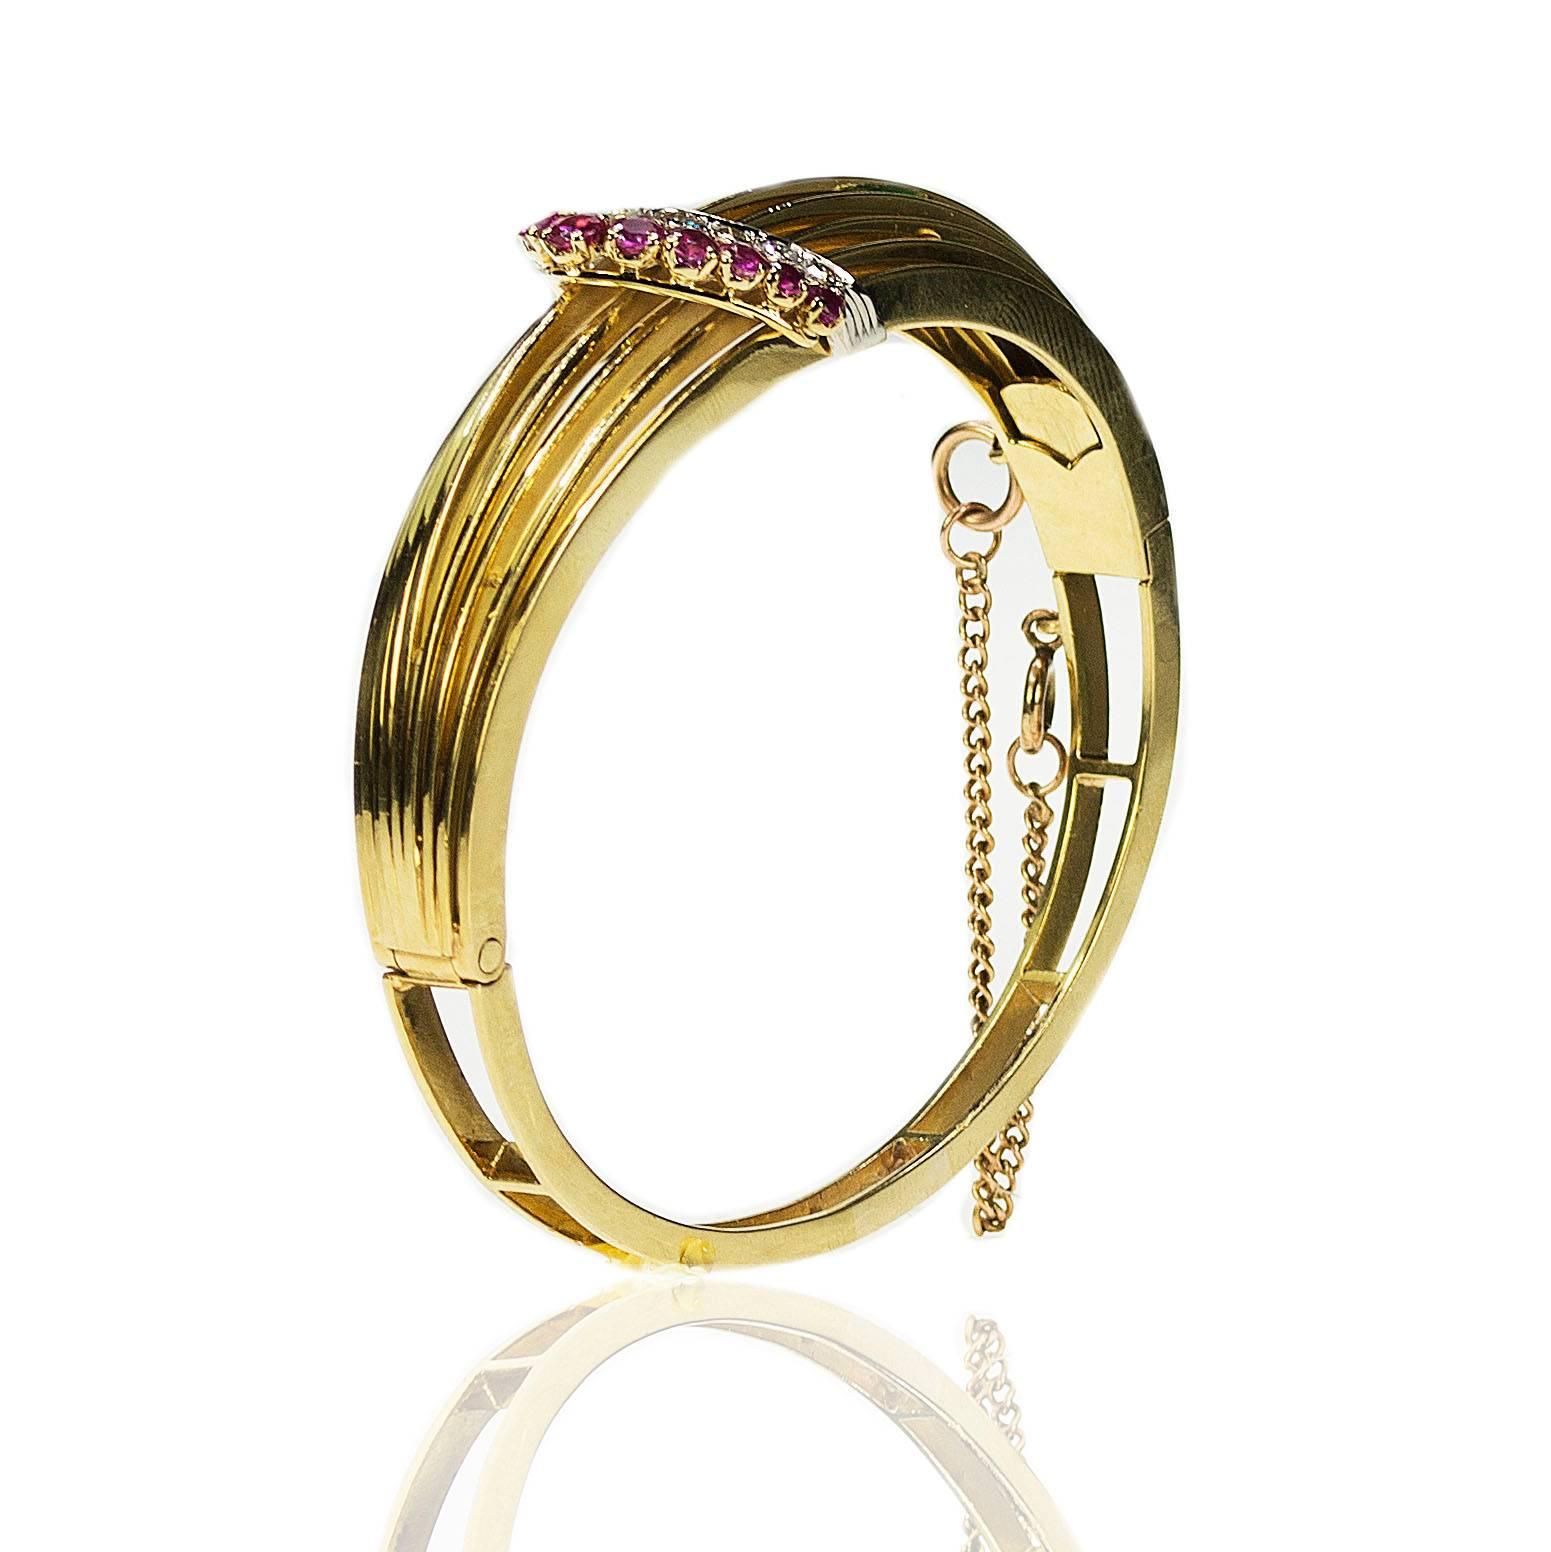 18k Retro Style Bangle containing 11 Burma Rubies weighing approximately 1..25 carats and 9 round diamonds weighing 1.15 carats. 38.82g